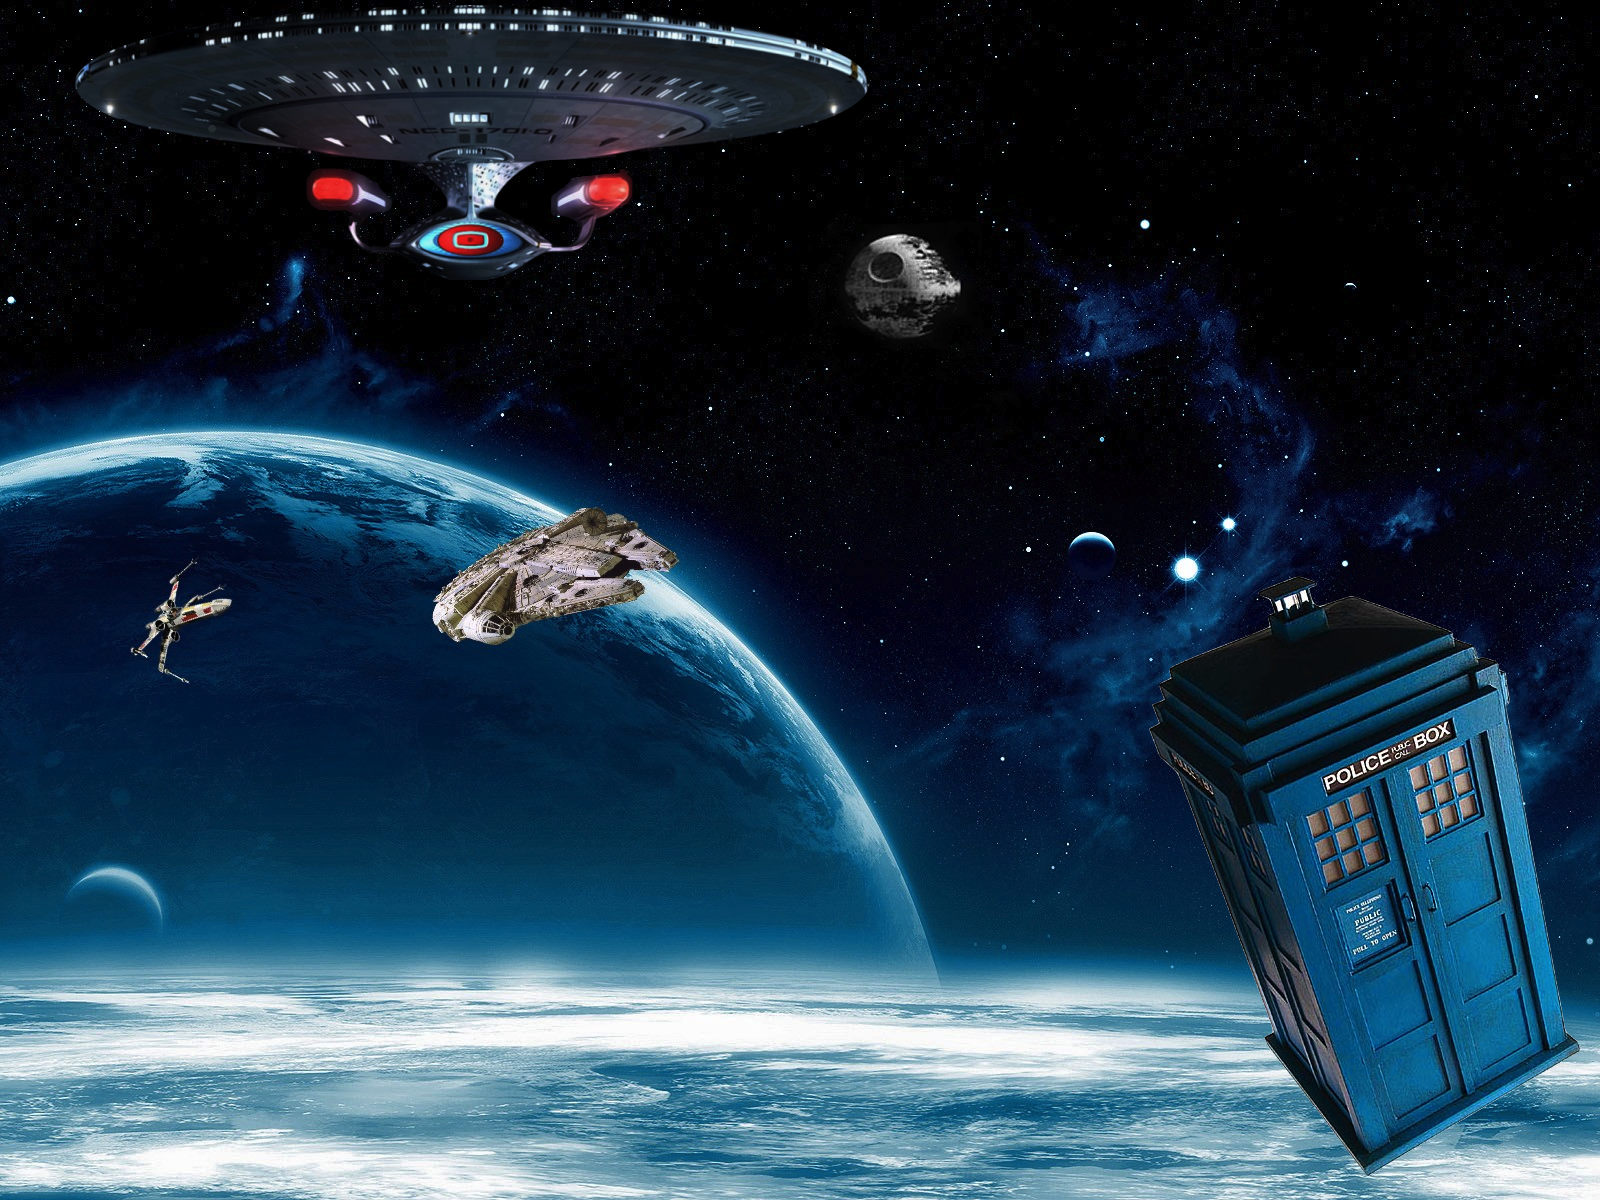 General 1600x1200 spaceship TARDIS Millennium Falcon Death Star X-wing space art science fiction crossover planet CGI USS Enterprise NCC-1701D Doctor Who space Star Trek Star Wars Star Wars Ships Star Trek Ships movies TV series vehicle